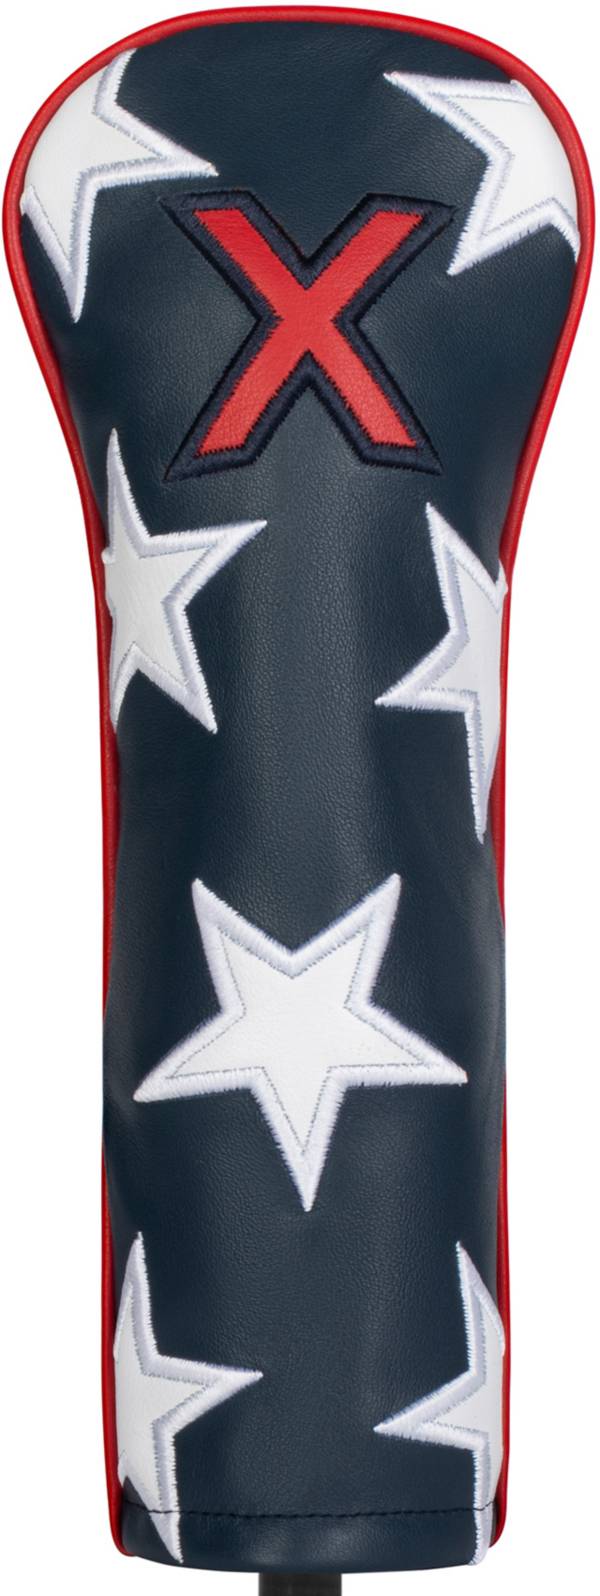 Titleist Stars & Stripes Leather Hybrid Headcover product image